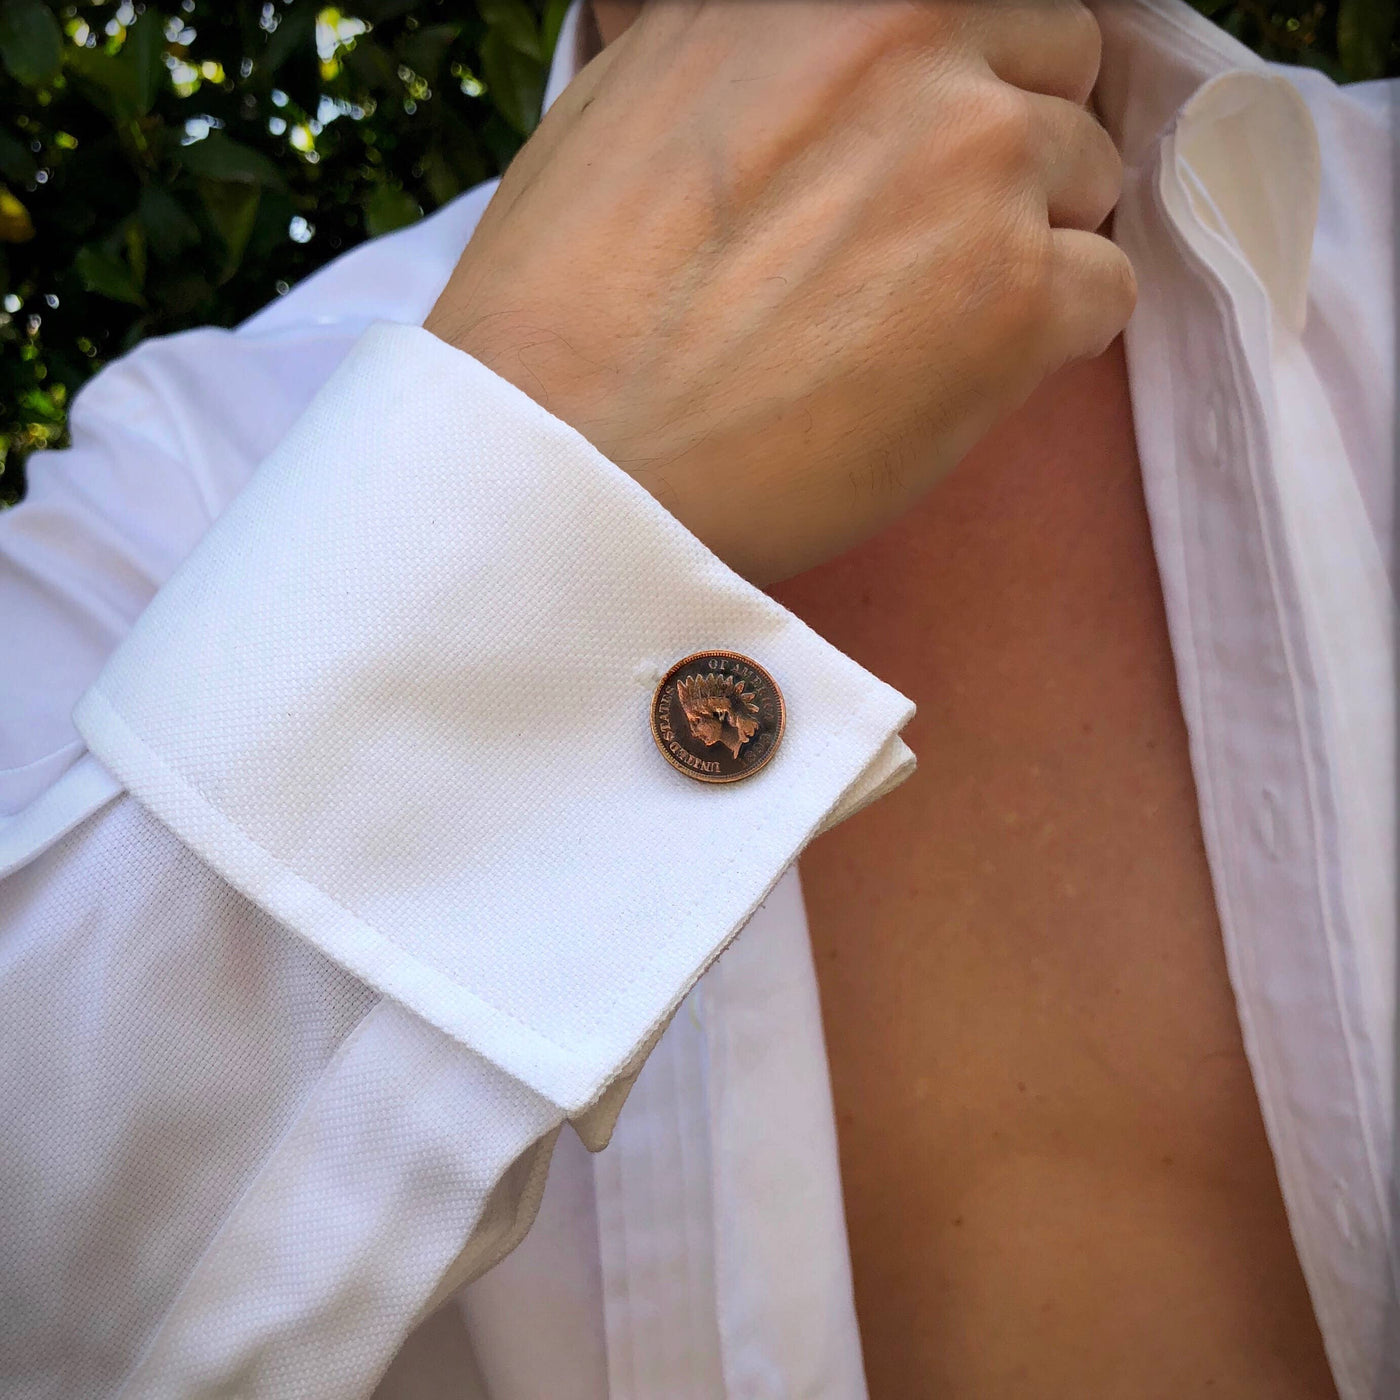 Indian Head Cent Cuff Links